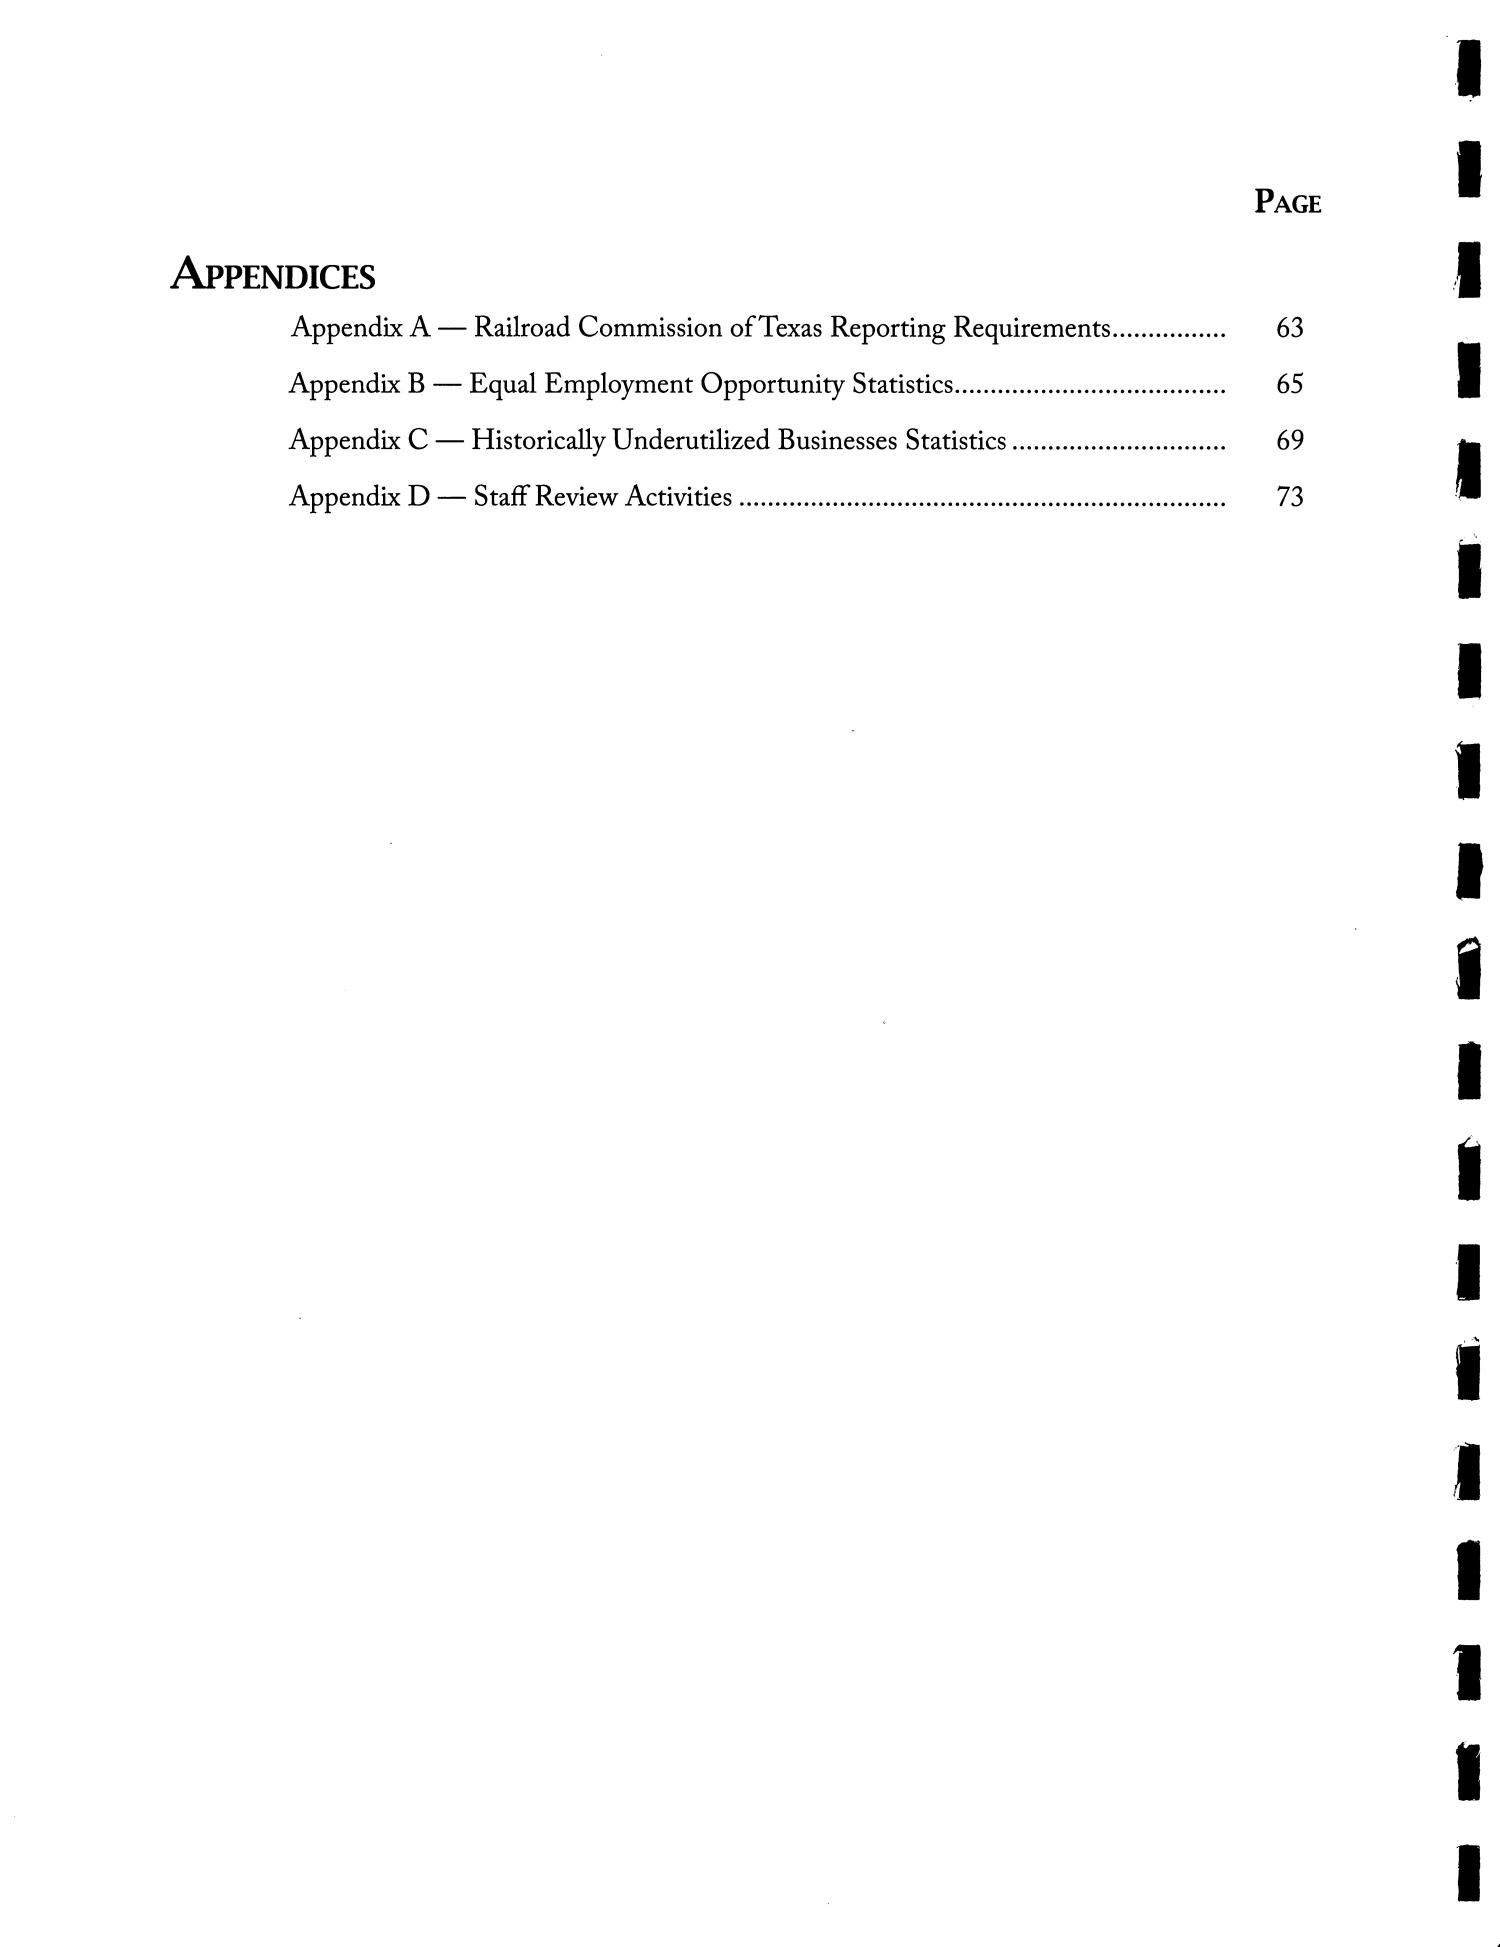 Staff Report with Final Results: Railroad Commission of Texas
                                                
                                                    Table Of Contents
                                                